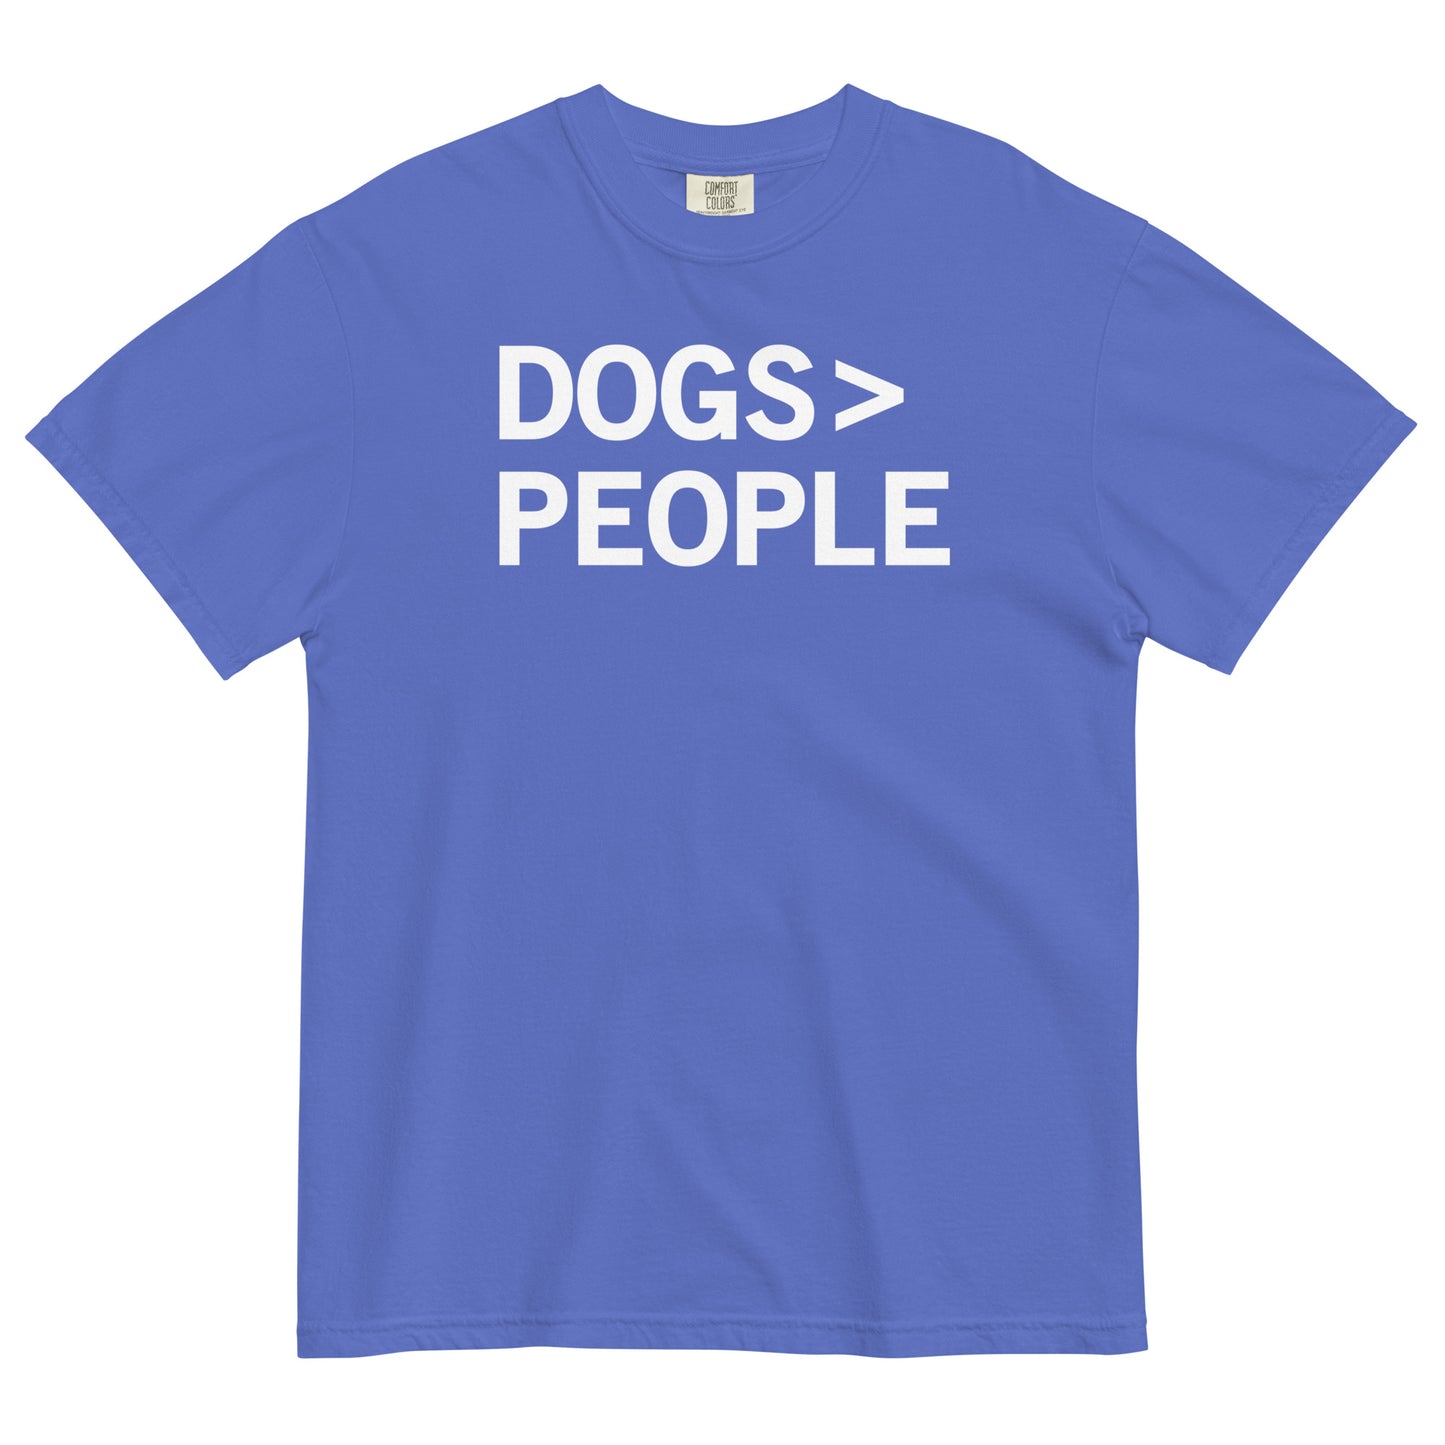 Dogs>People Men's Relaxed Fit Tee